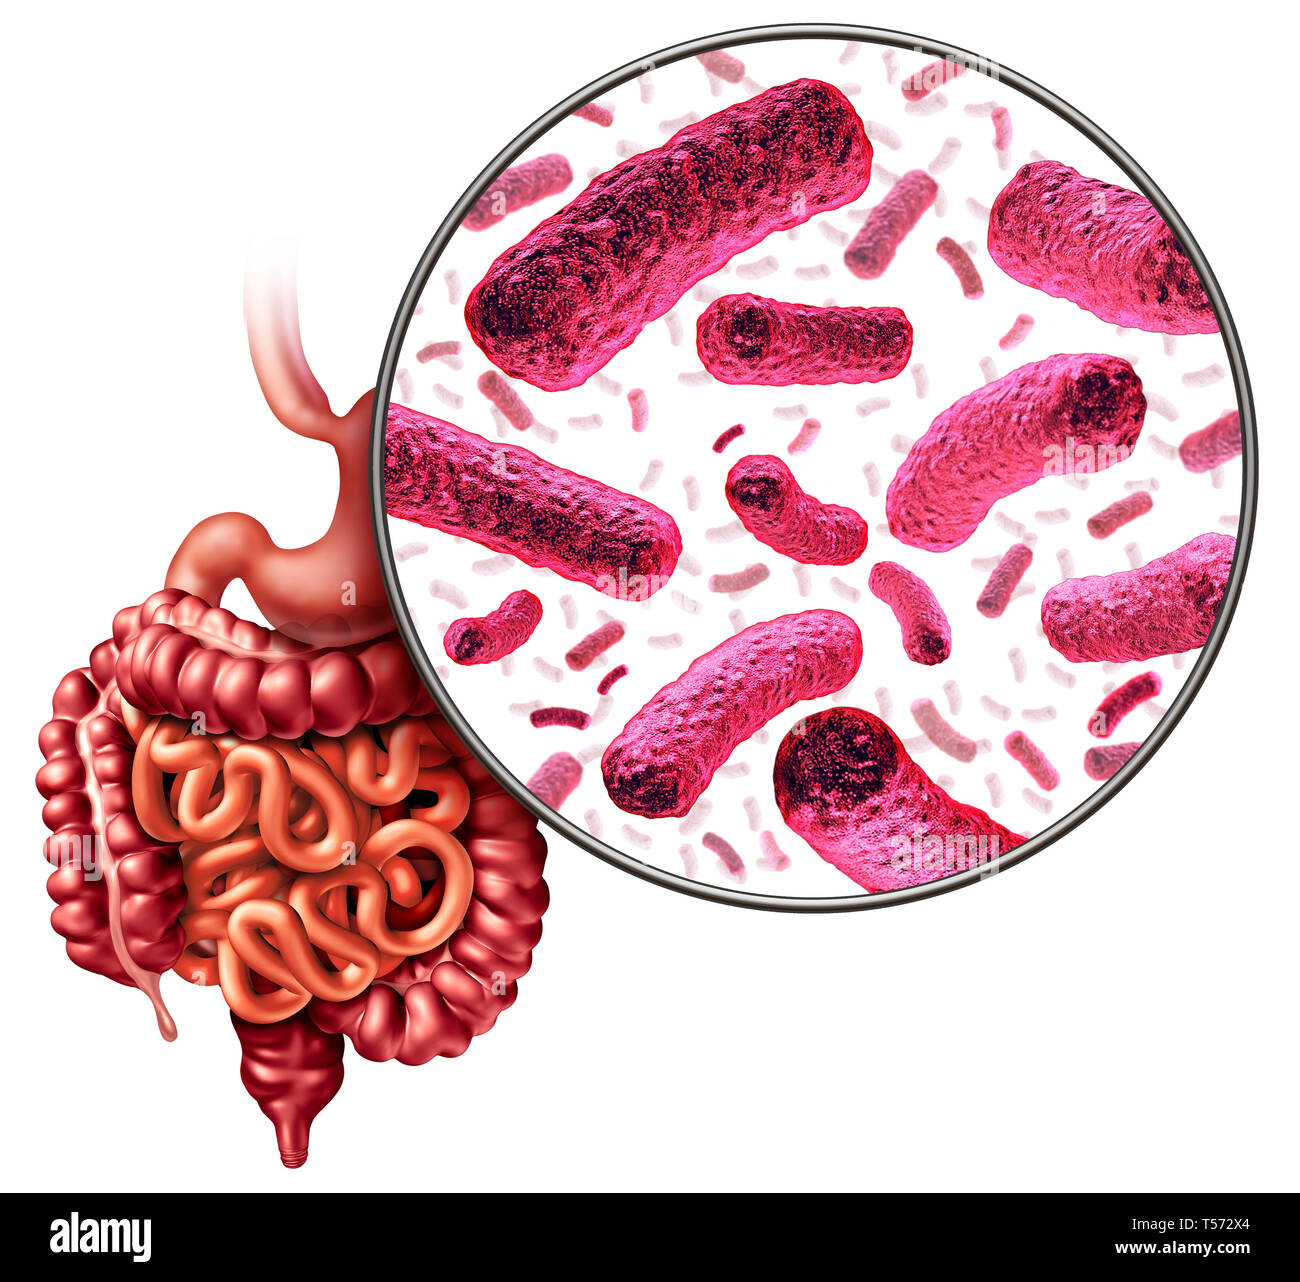 Digestion bacteria and intestine or gut flora as intestinal bacterium medical anatomy concept as a 3D illustration. Stock Photo